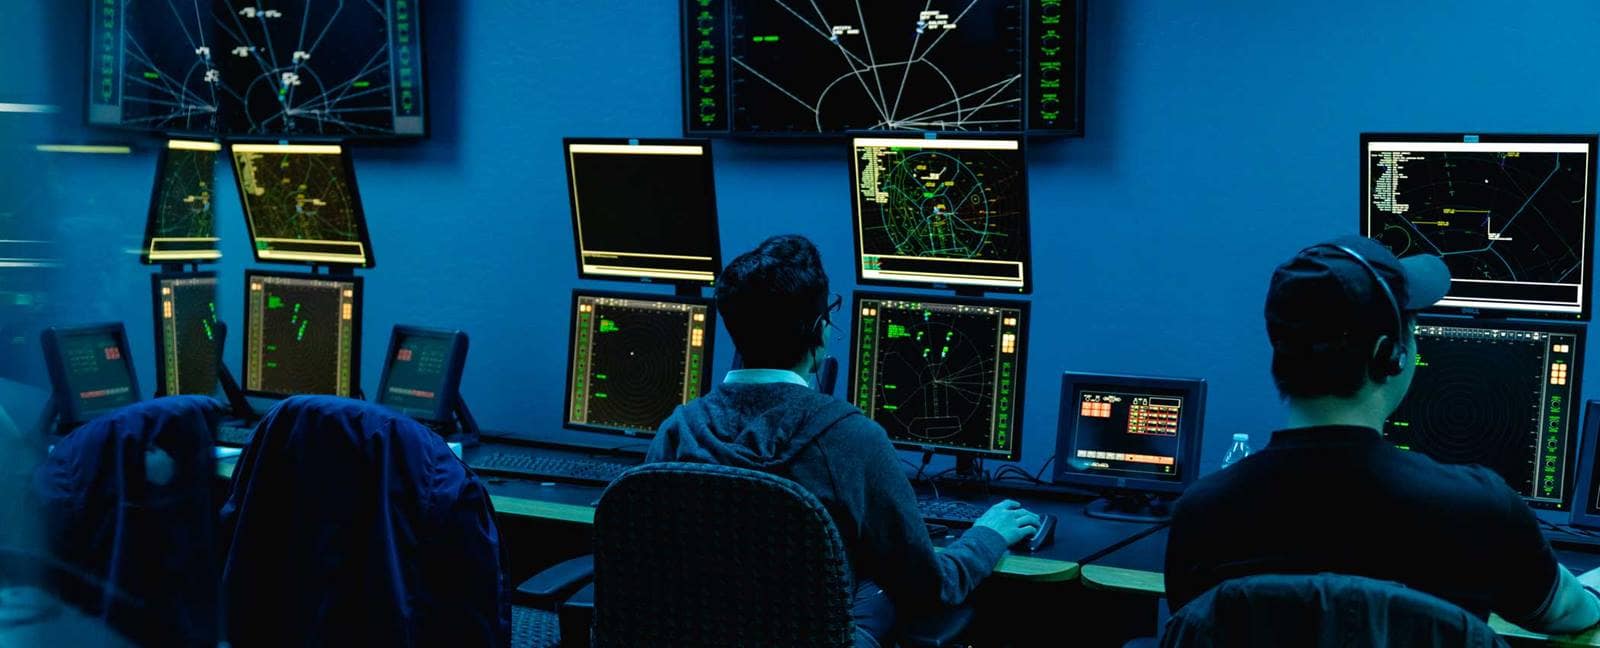 Bachelor's Degree in Air Traffic Management | Embry-Riddle ...